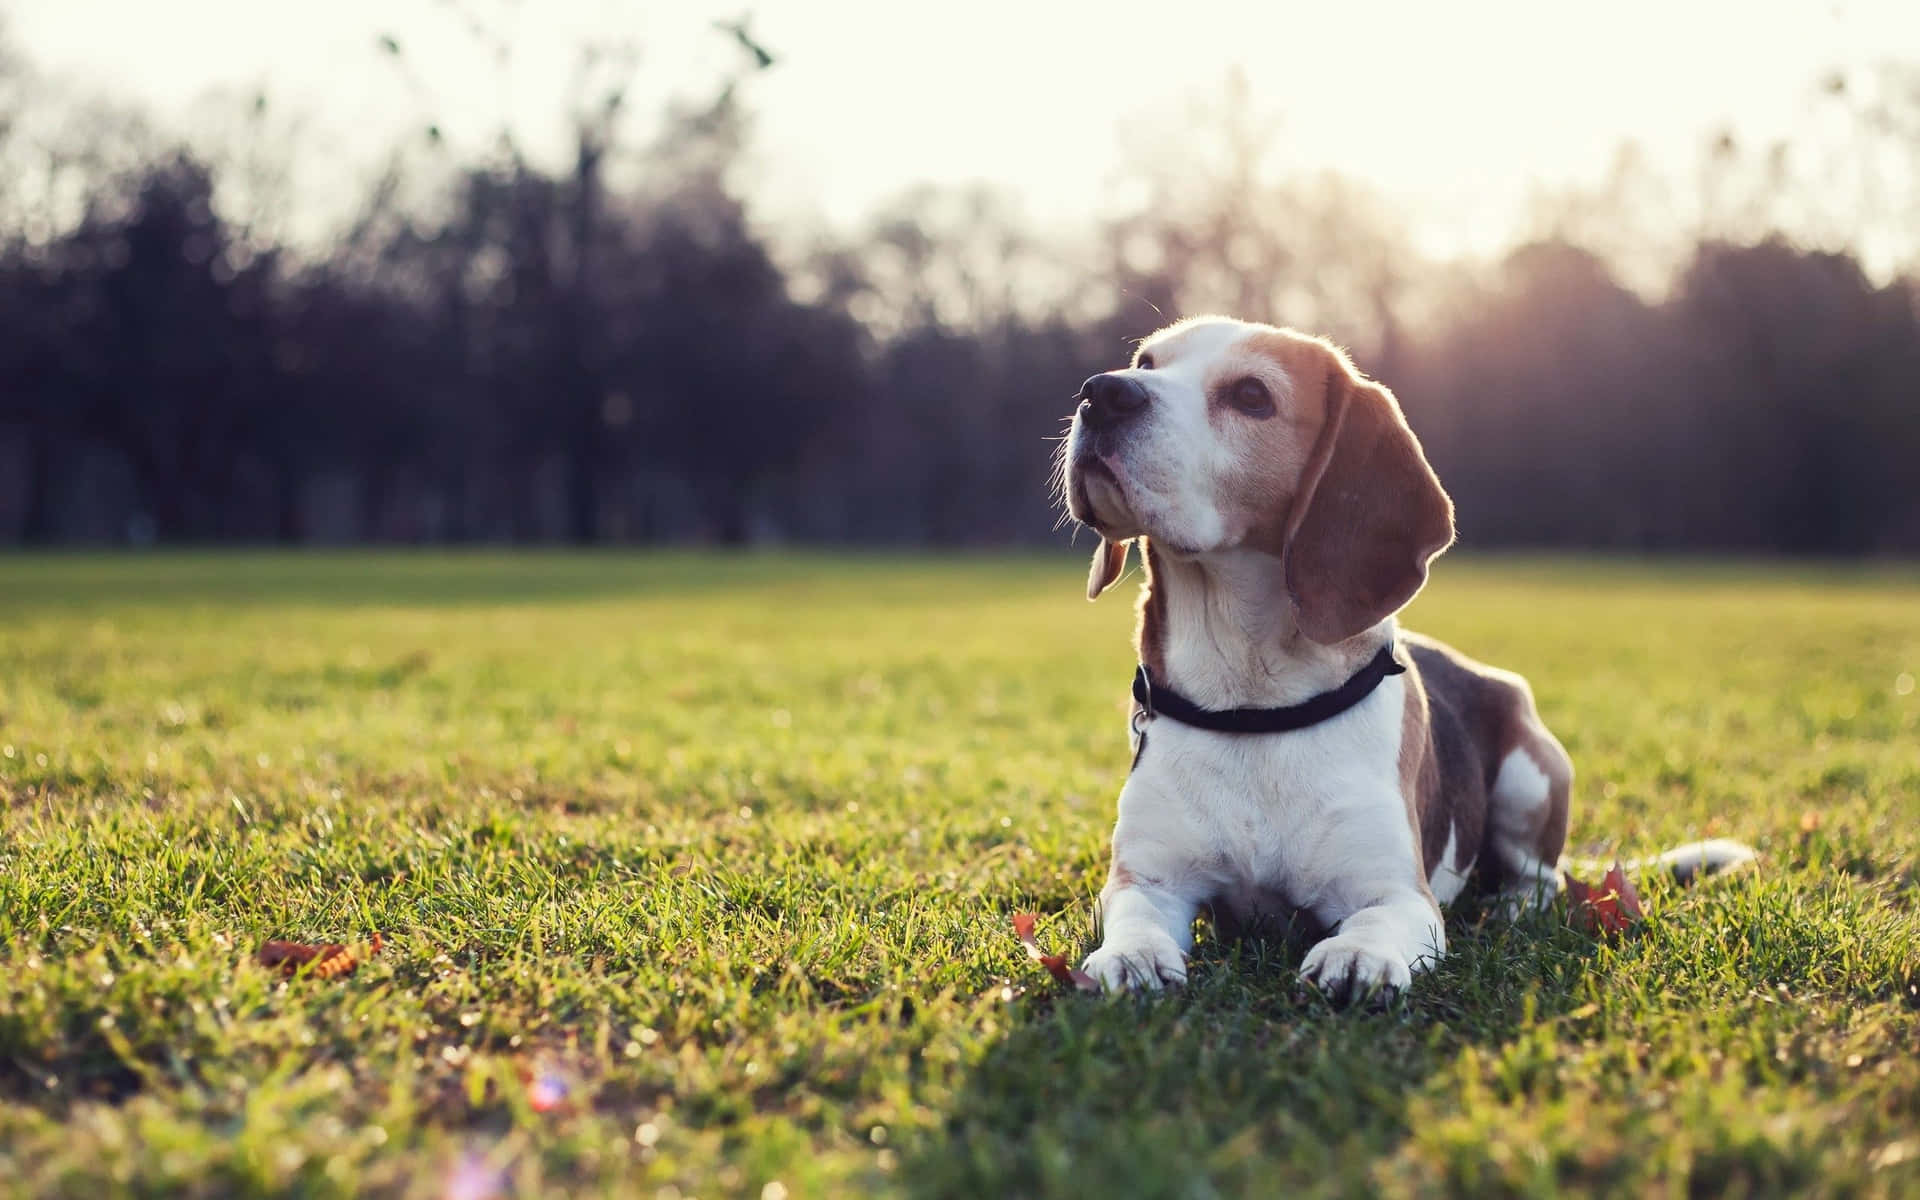 Adorable beagle puppy dog playing in grass